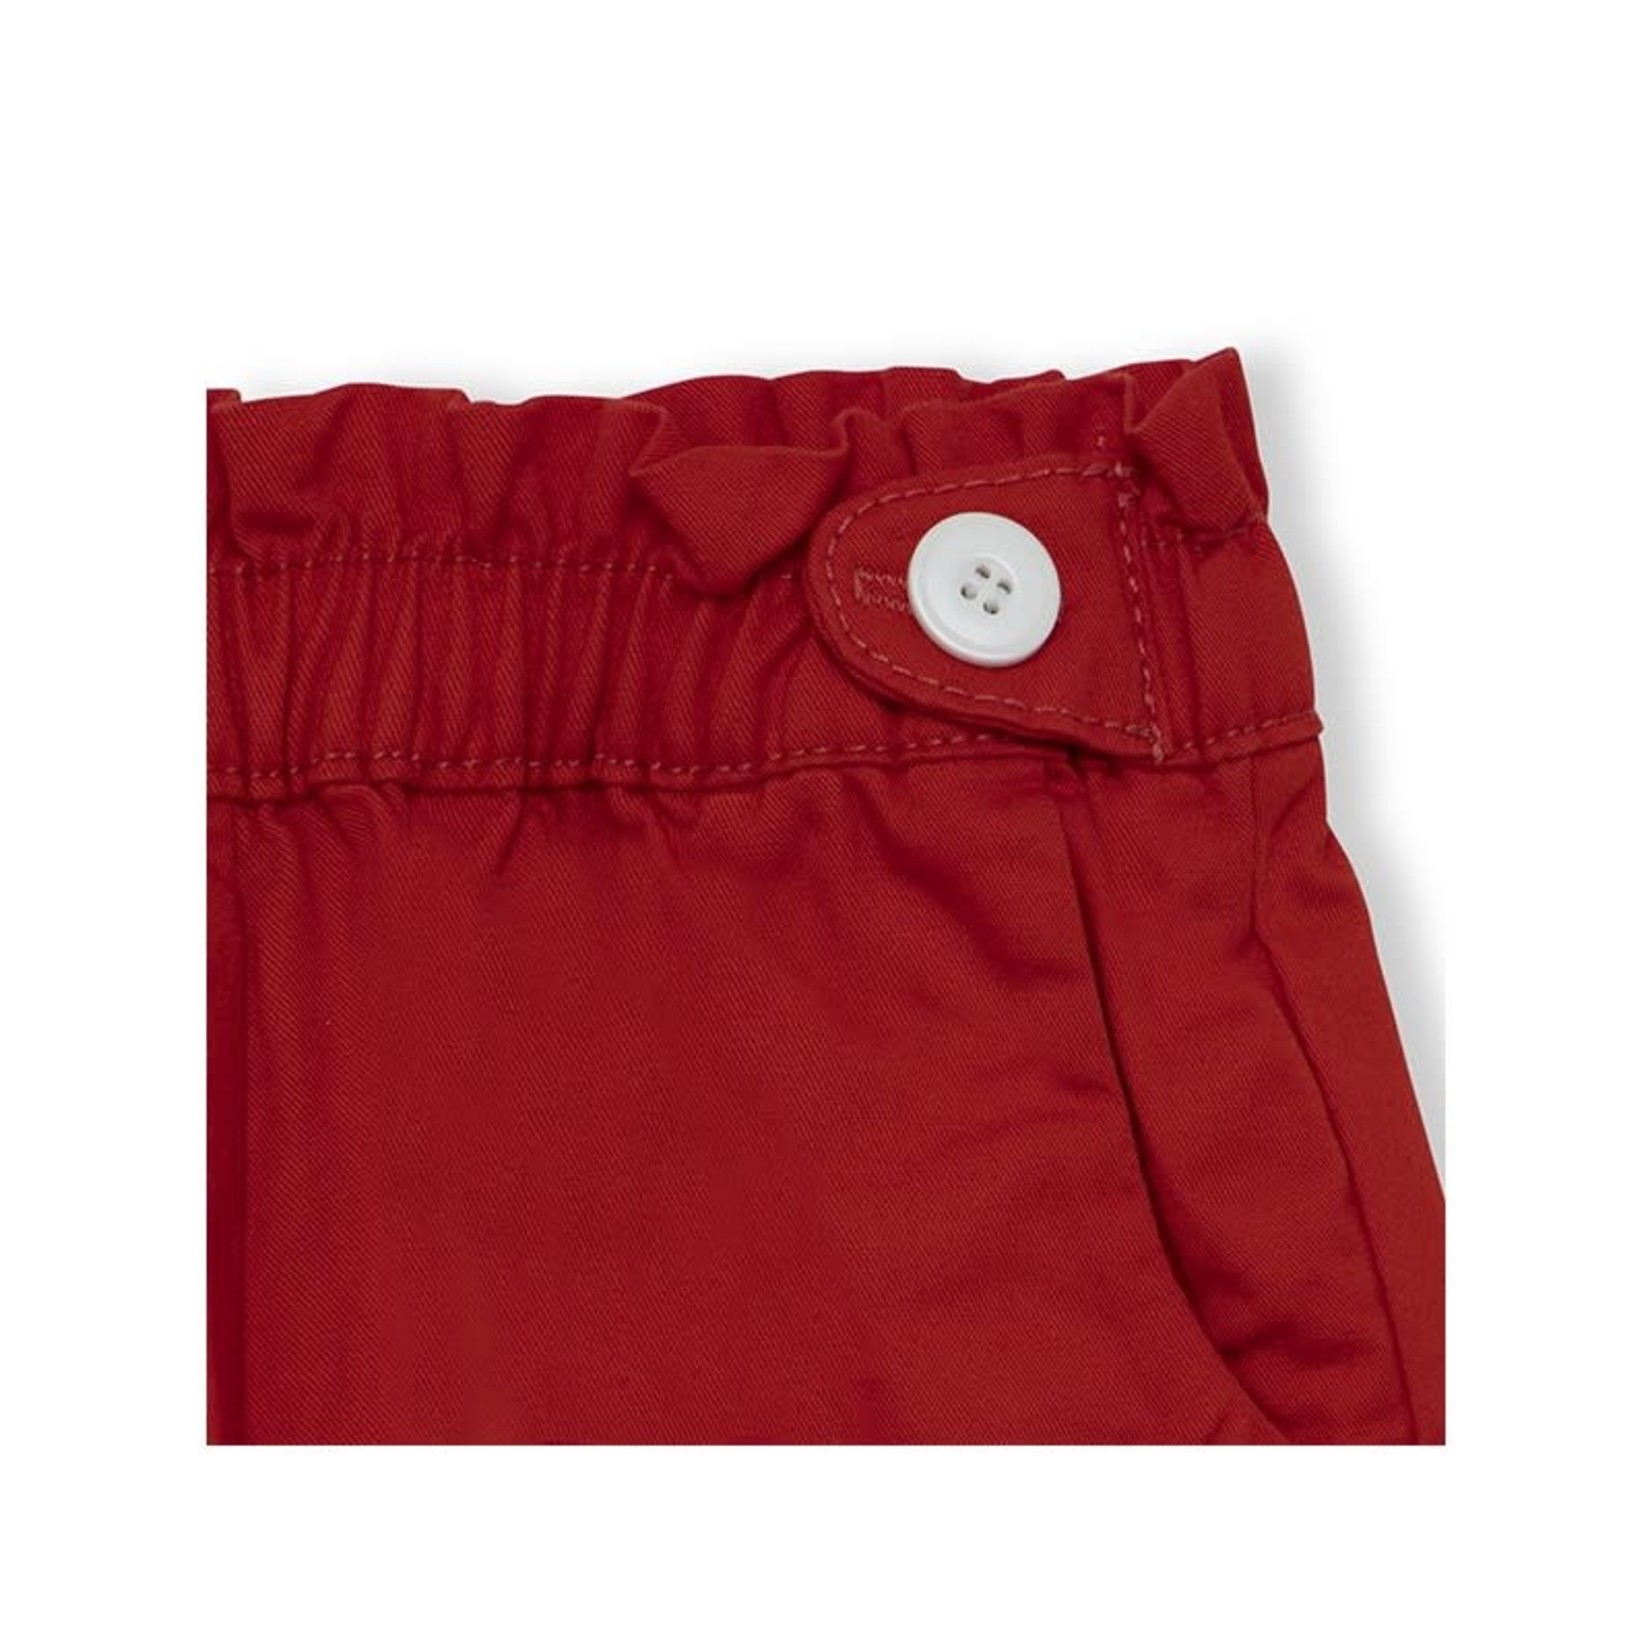 TucTuc TUC TUC - Red twill shorts with gathers and decorative buttons 'Basicos'